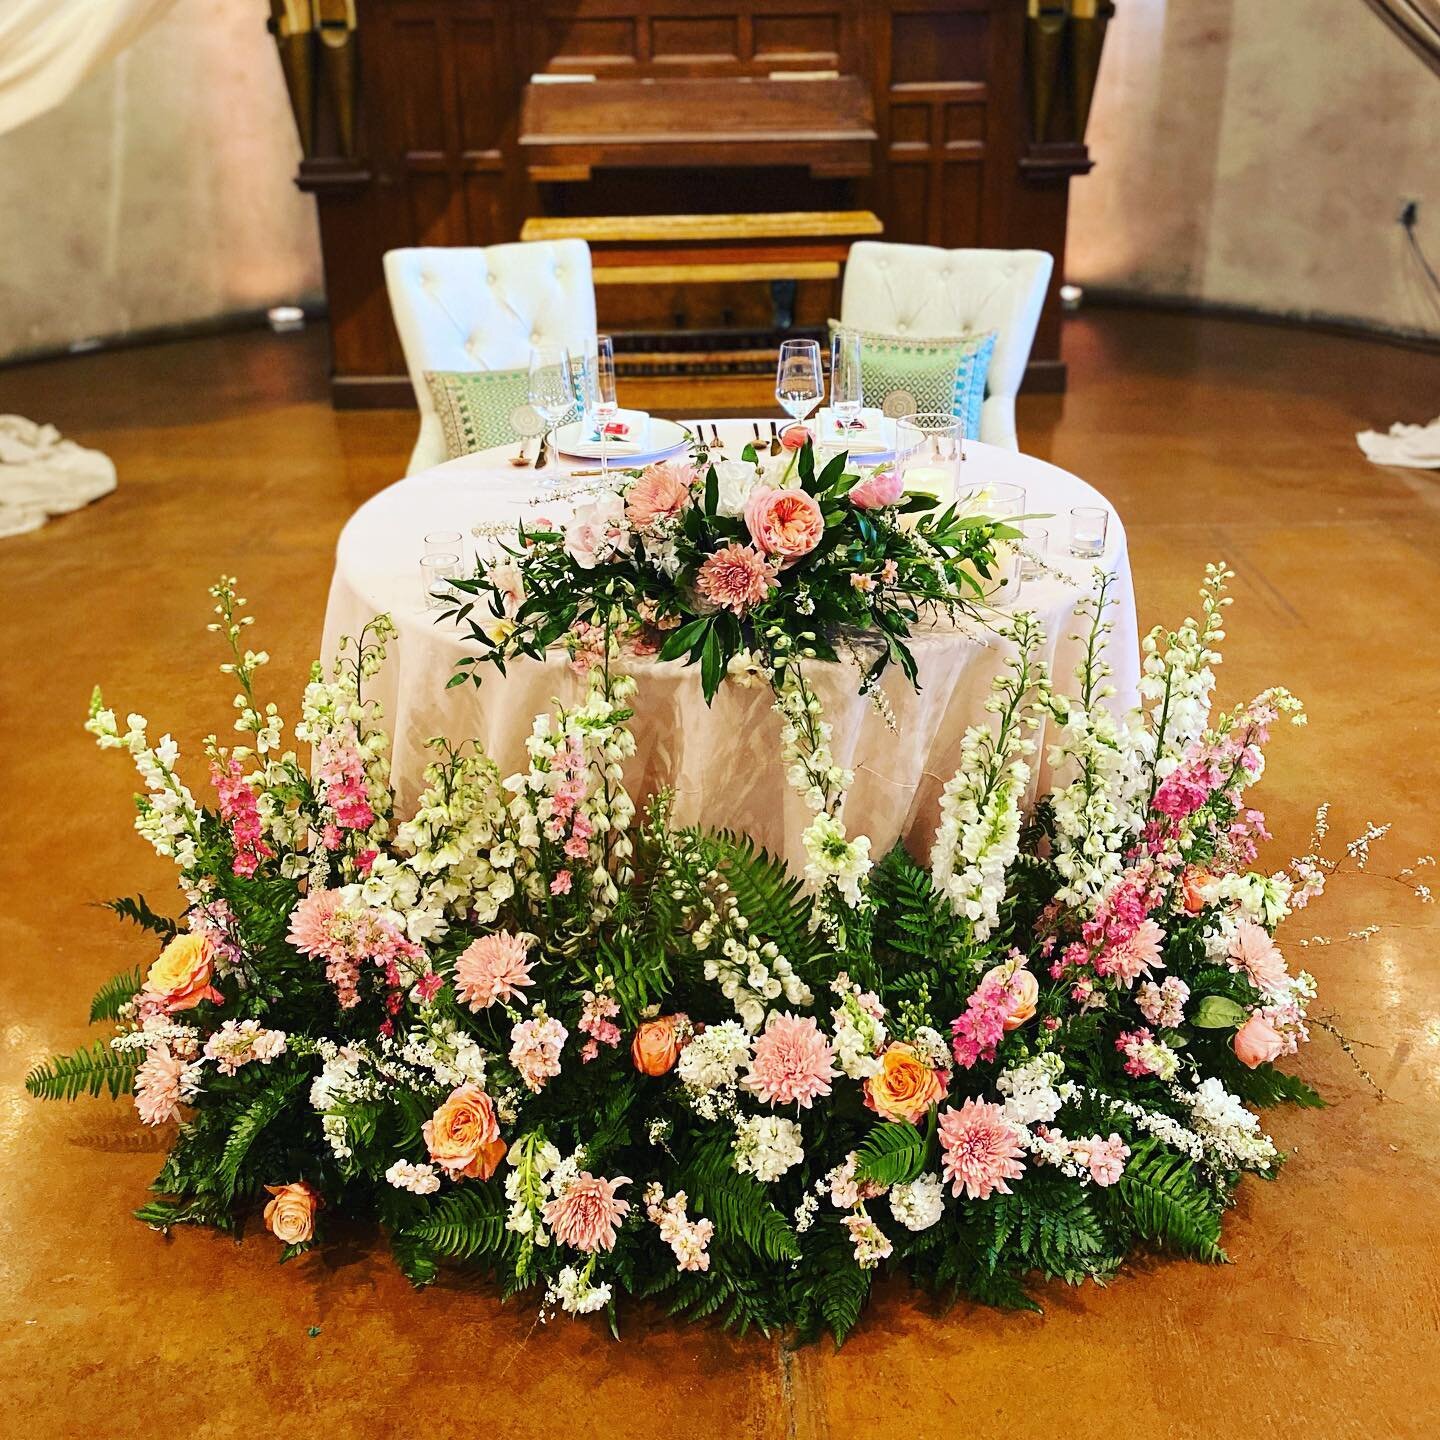 Sweetheart Goals ⭐️⭐️⭐️⭐️⭐️ loving everything about these bright spring colors! Unsure about adding extra decor into your ceremony? Fear not, we can always re-purpose it for you and create gorgeous reception magic. ❤️